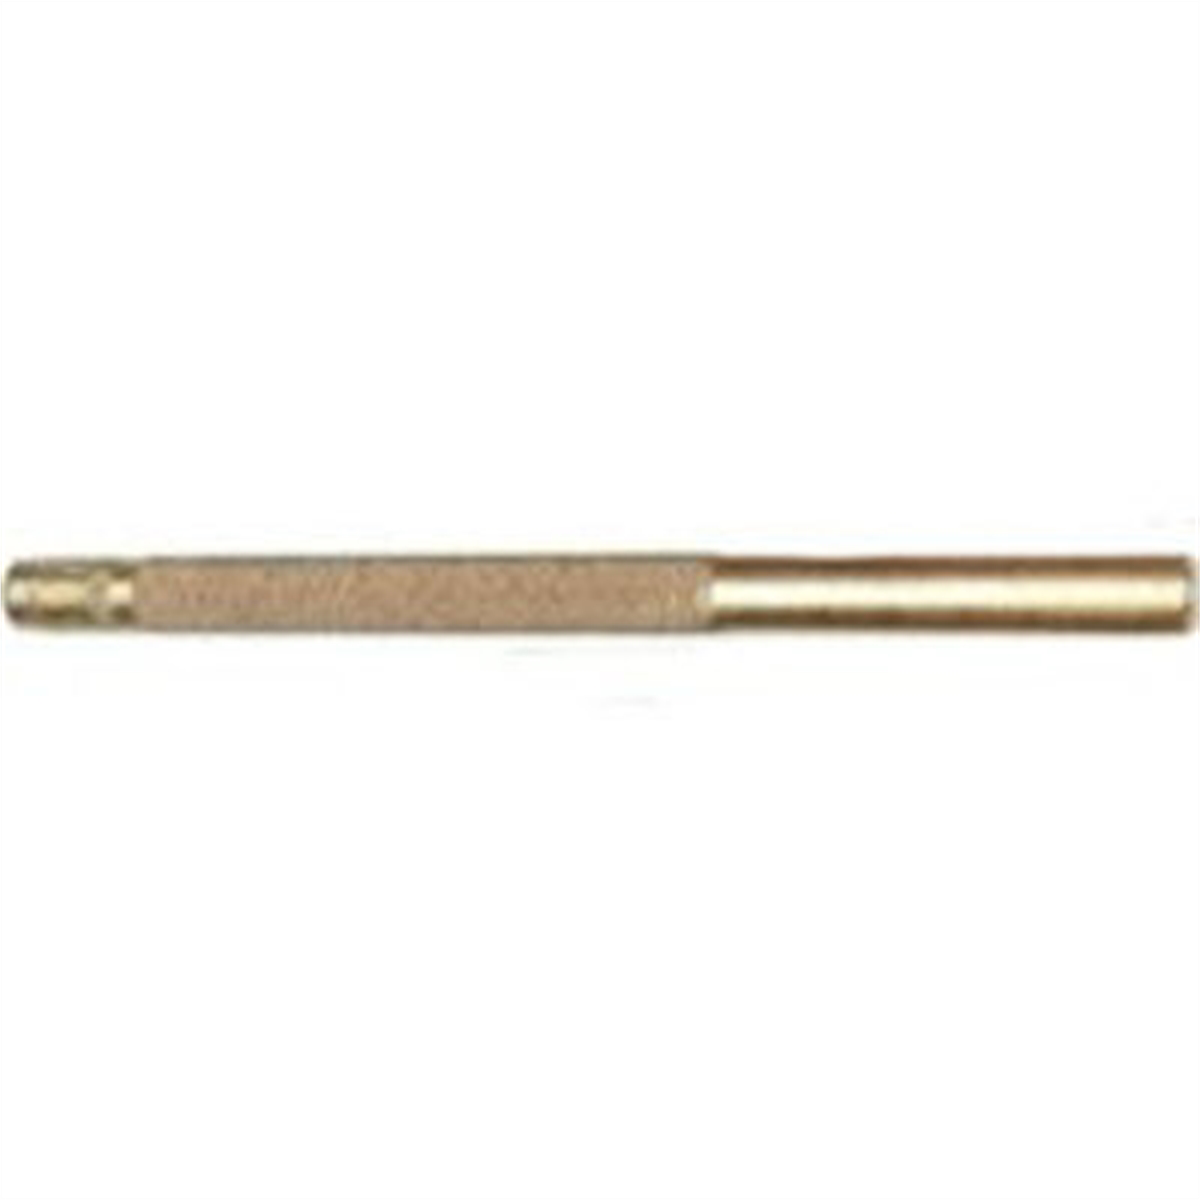 2 Piece Brass Punch Set Includes 1/2 Inch And 3/4 Inch Brass Drift Punches  Made